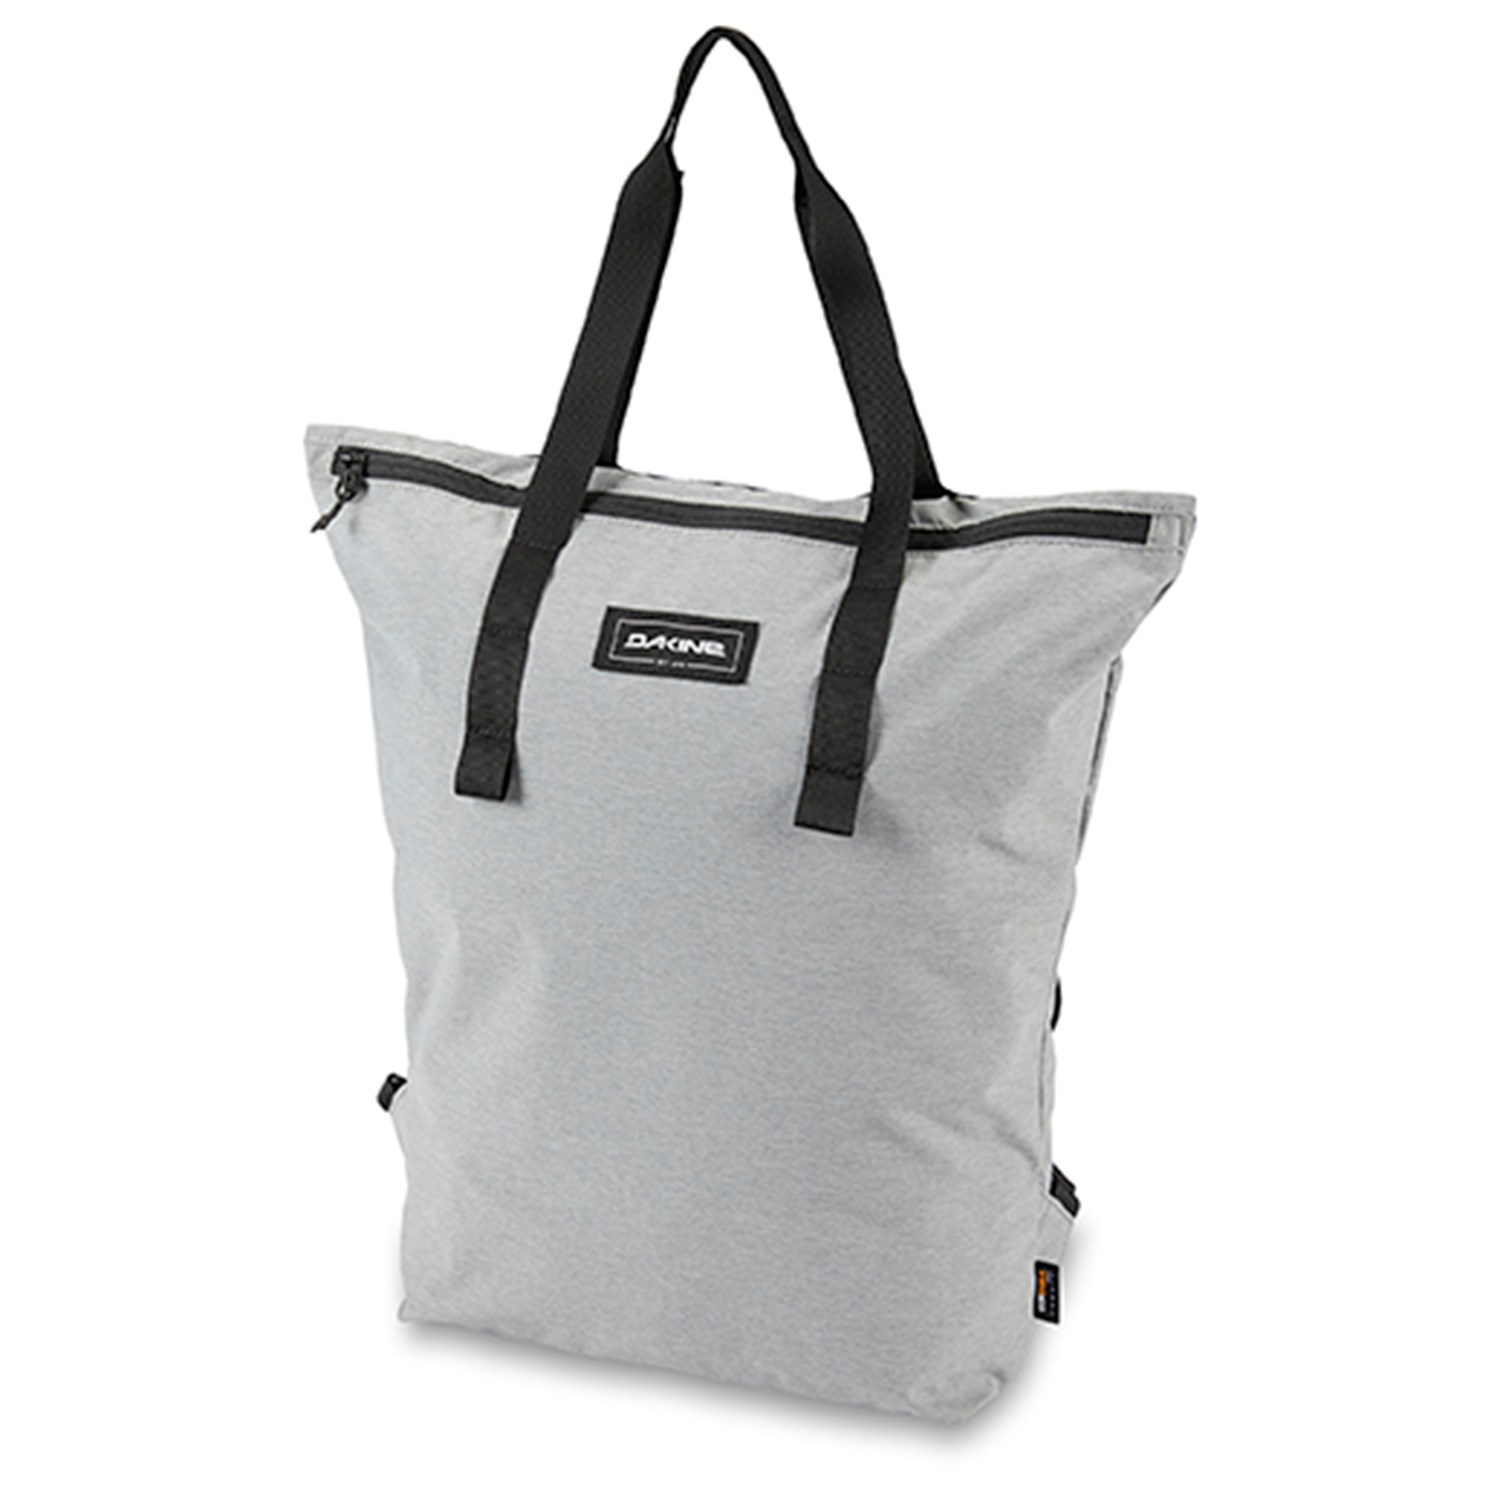 Backcountry 36L Gear Tote